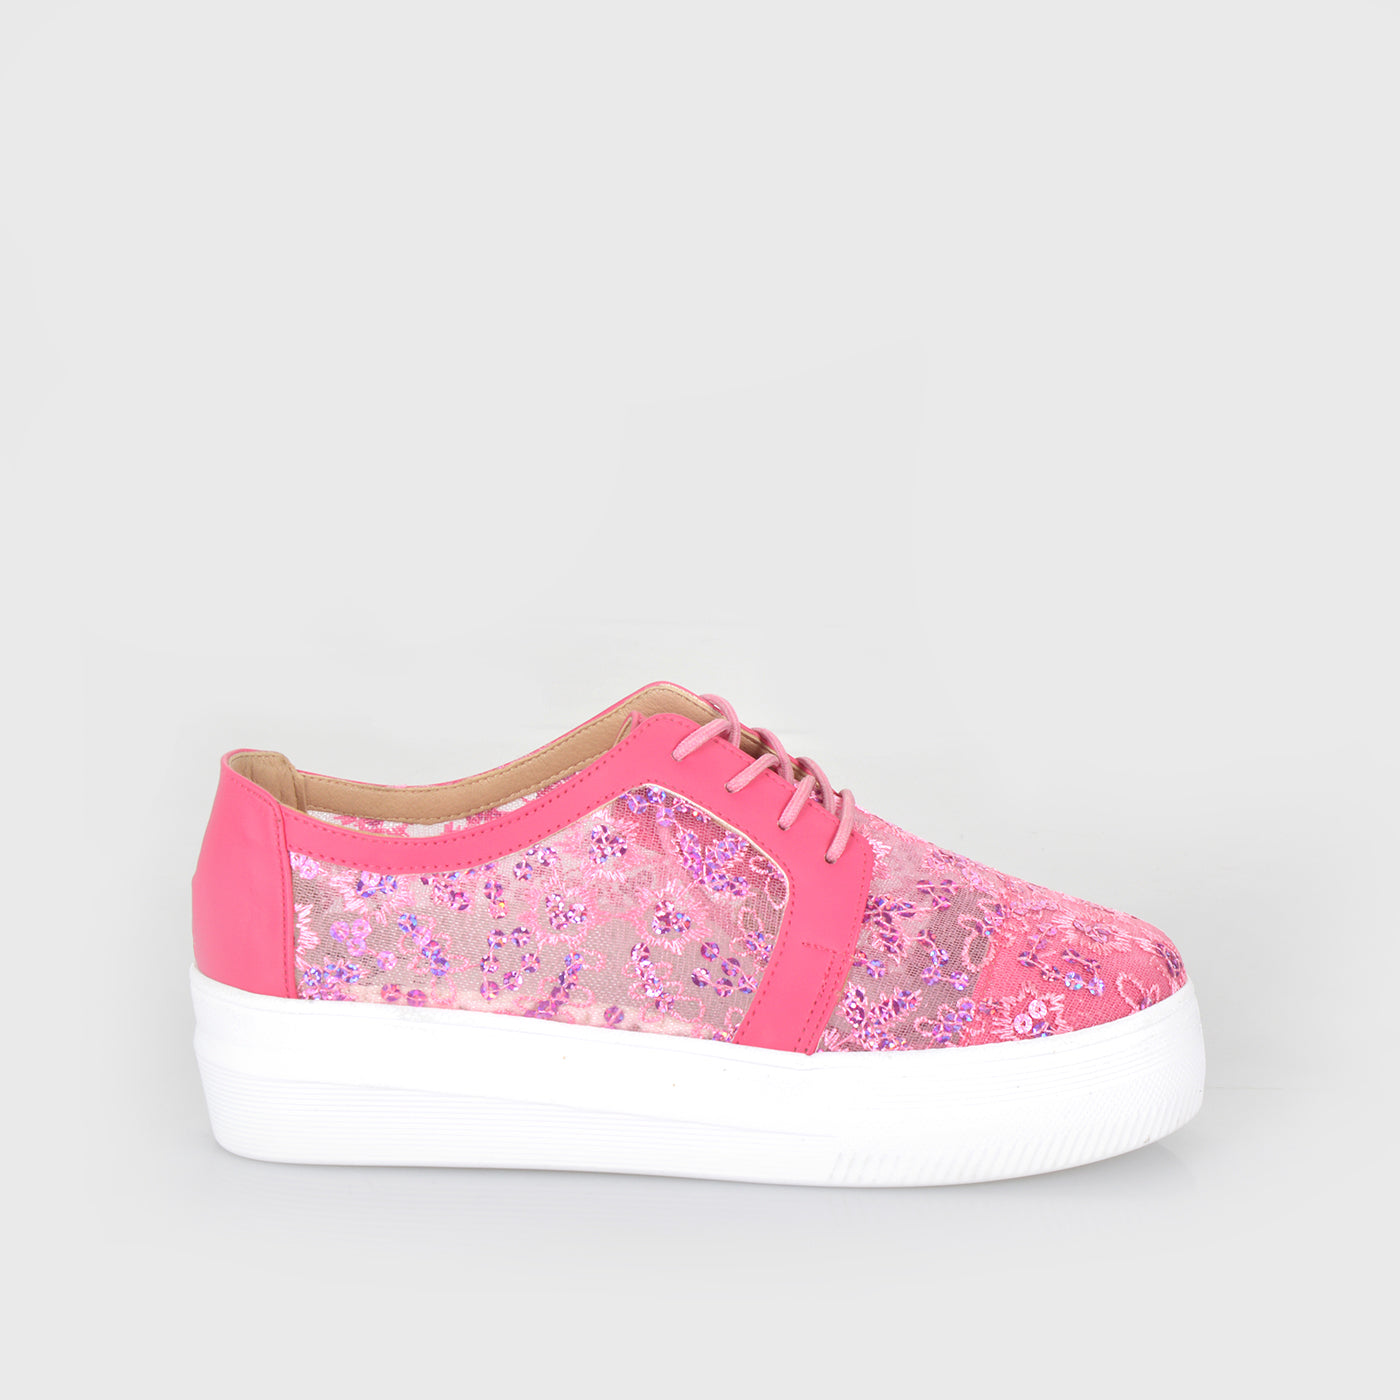 Pink Leather Sneaker with Details